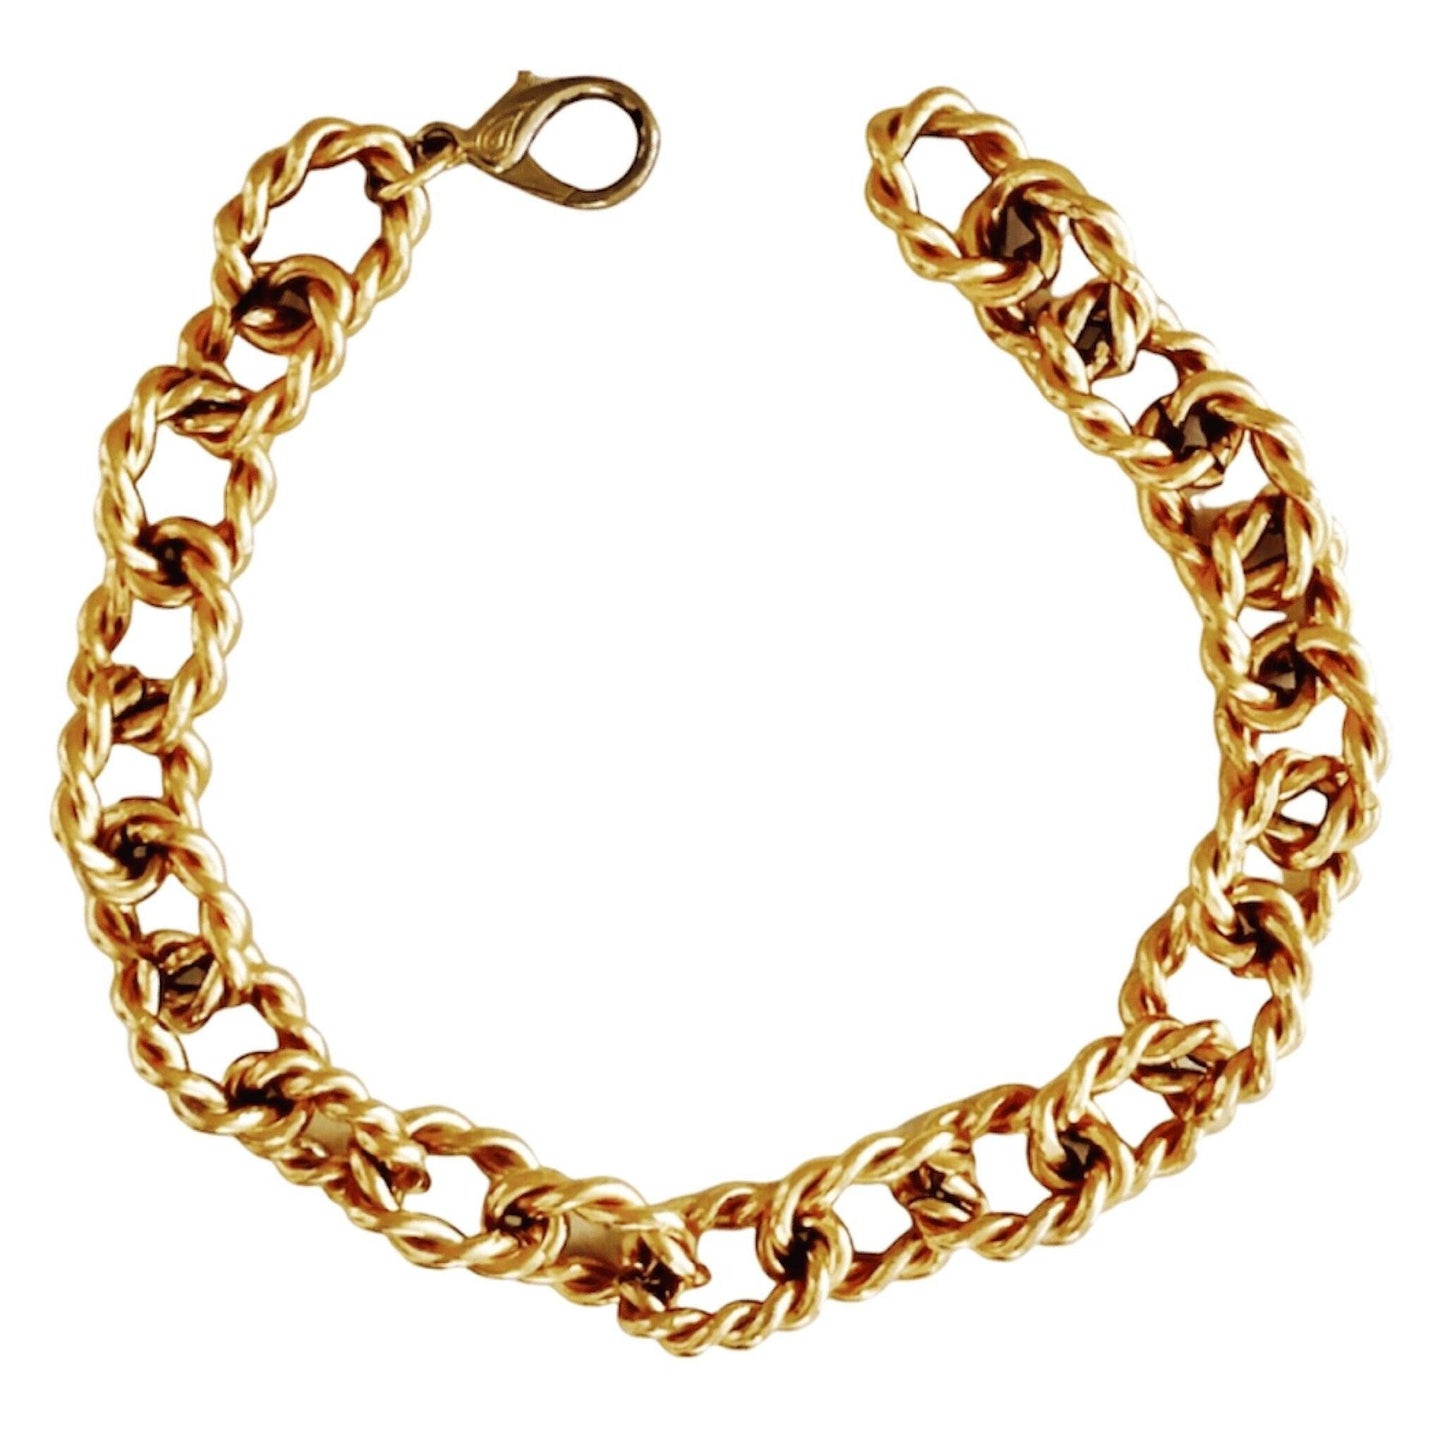 Vintage Yellow Gold Tone Knotted Link Chain Necklace